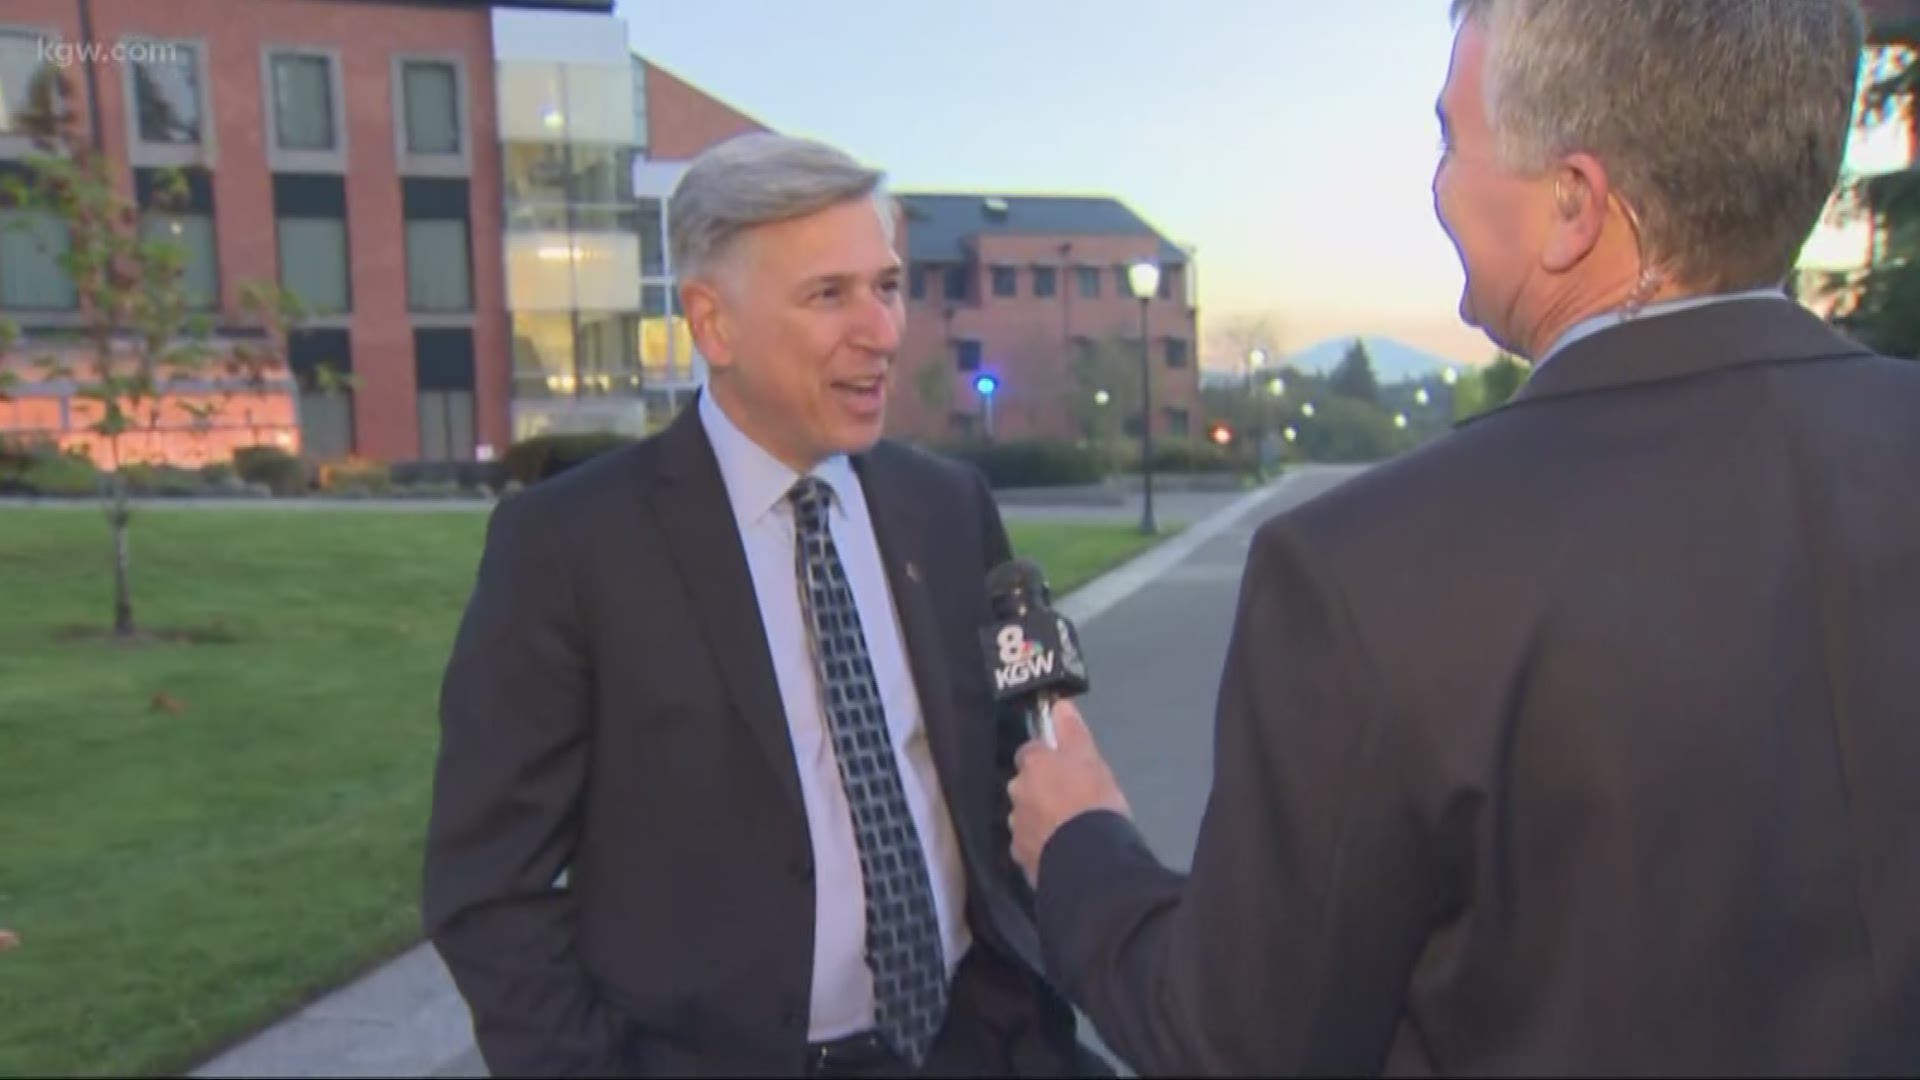 As part of Vancouver Week, KGW's Tim Gordon chatted with WSU Vancouver campus chancellor Mel Netzhammer.